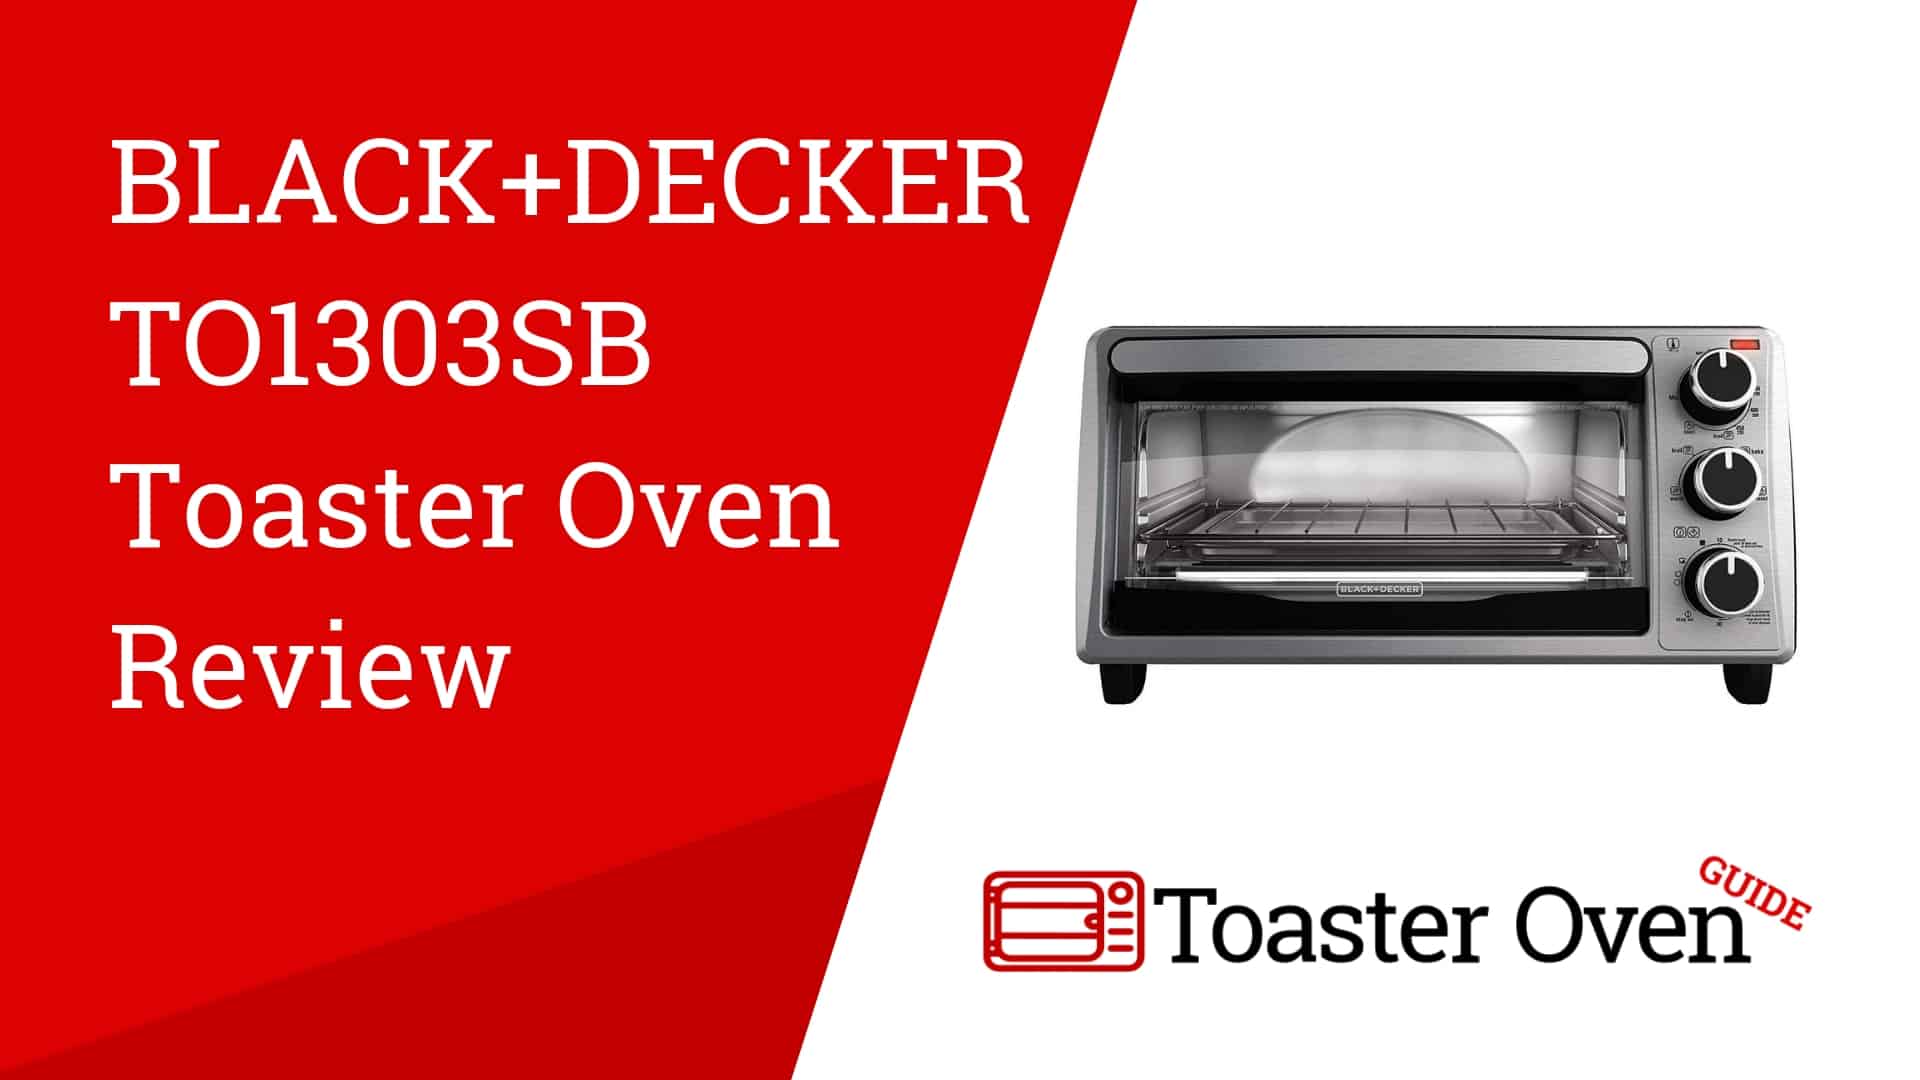 Black+Decker TO1303SB Toaster Oven Review